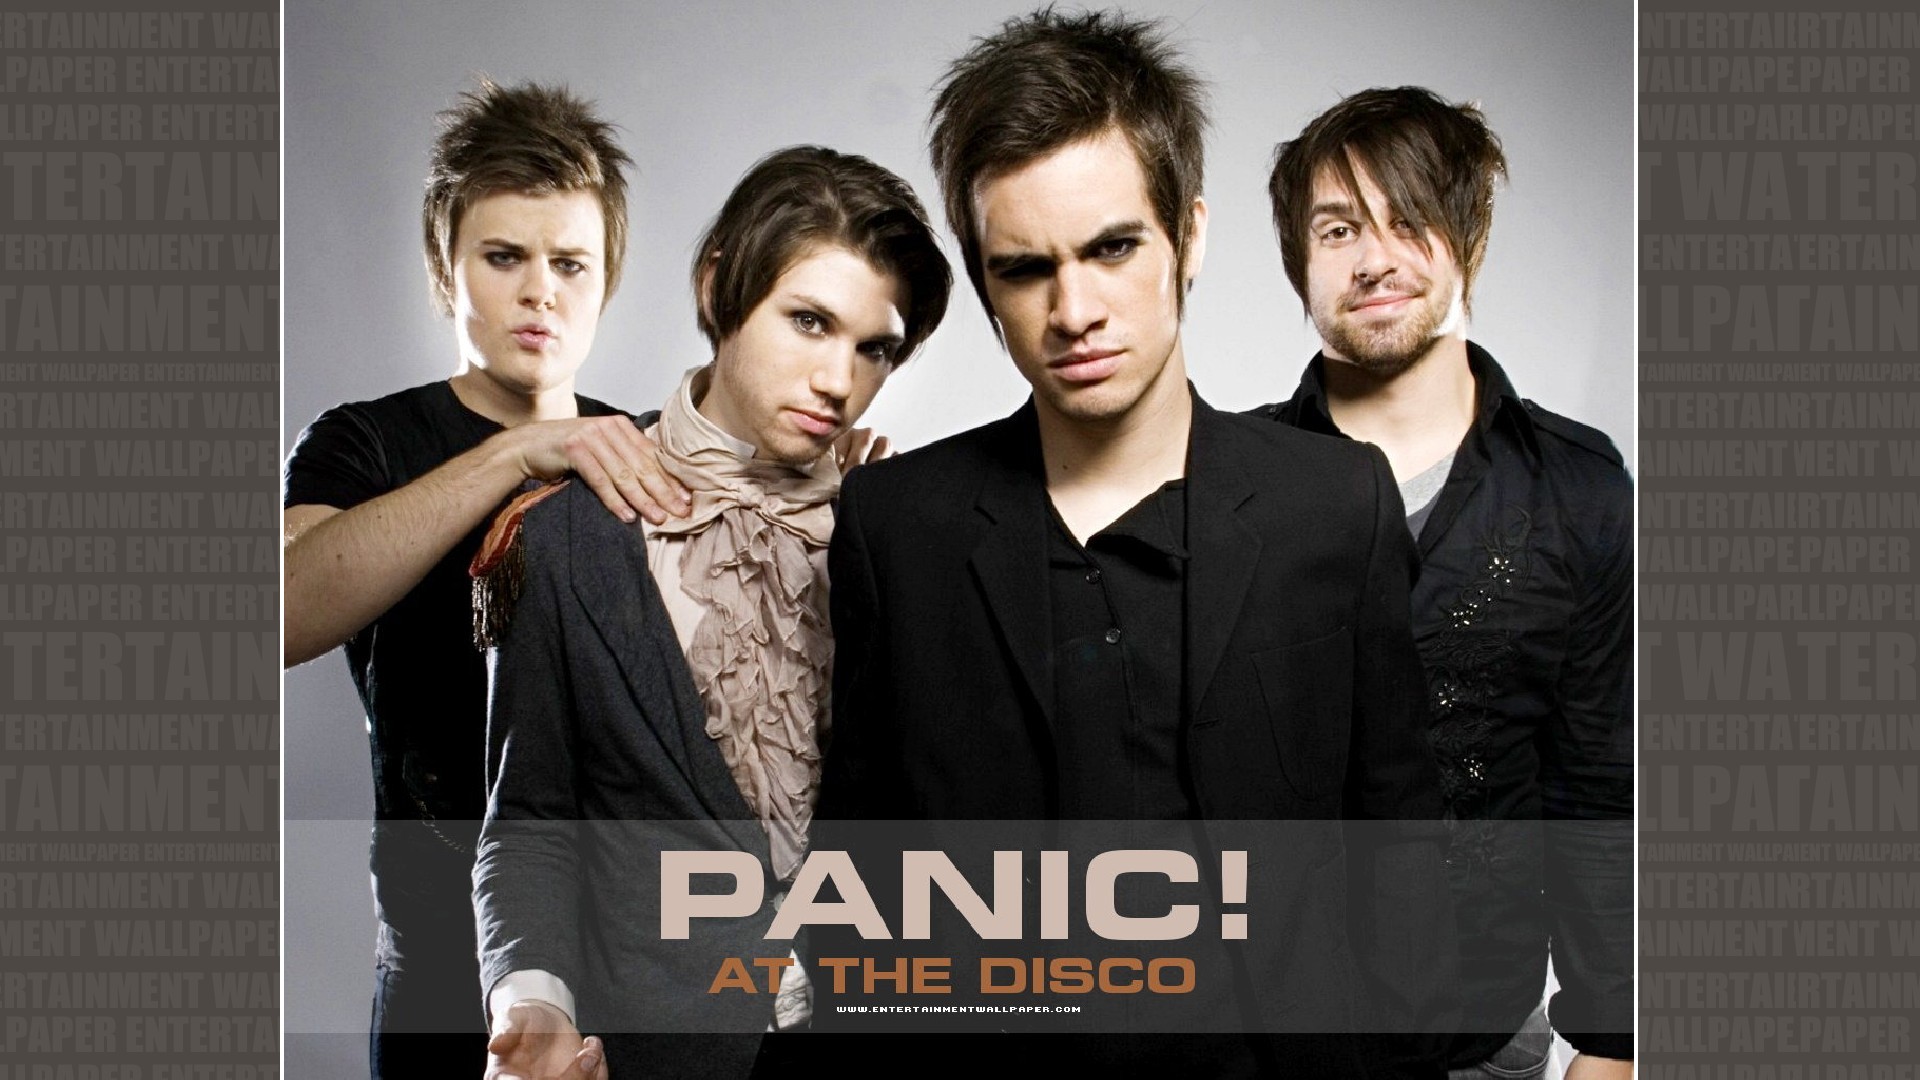 1920x1080 Panic At the Disco Wallpaper - Original size, download now.